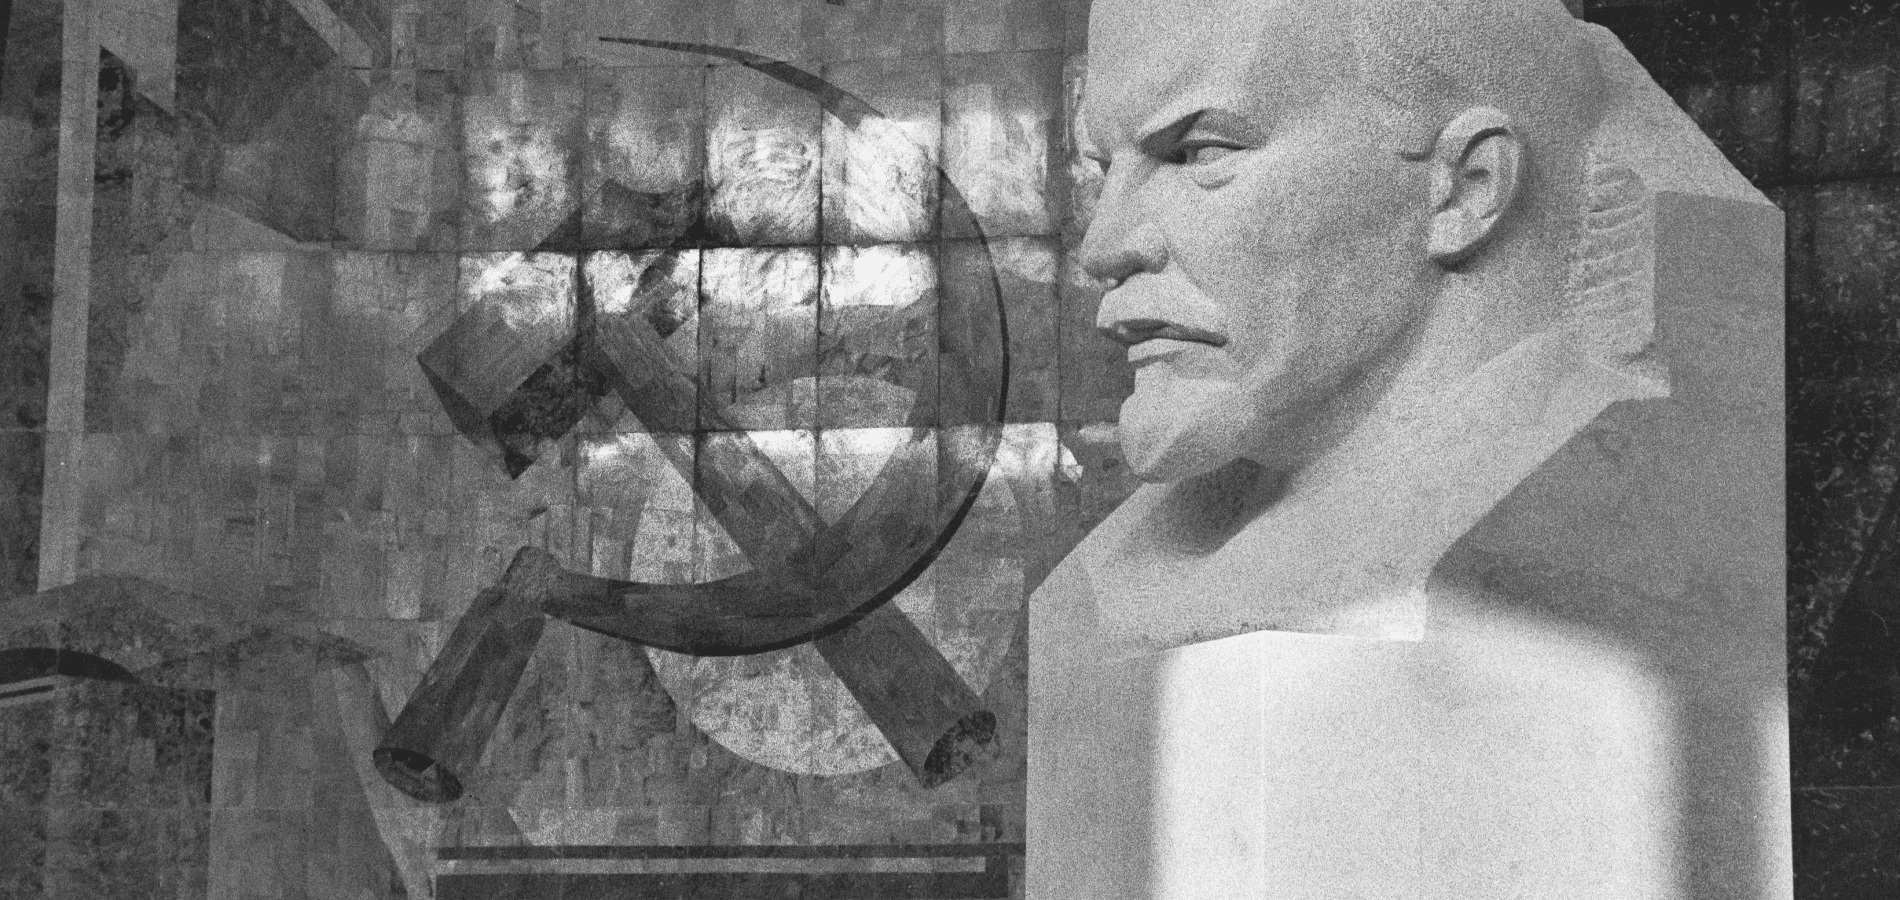 Russian Hammer and Sickle next to a bust of Lenin